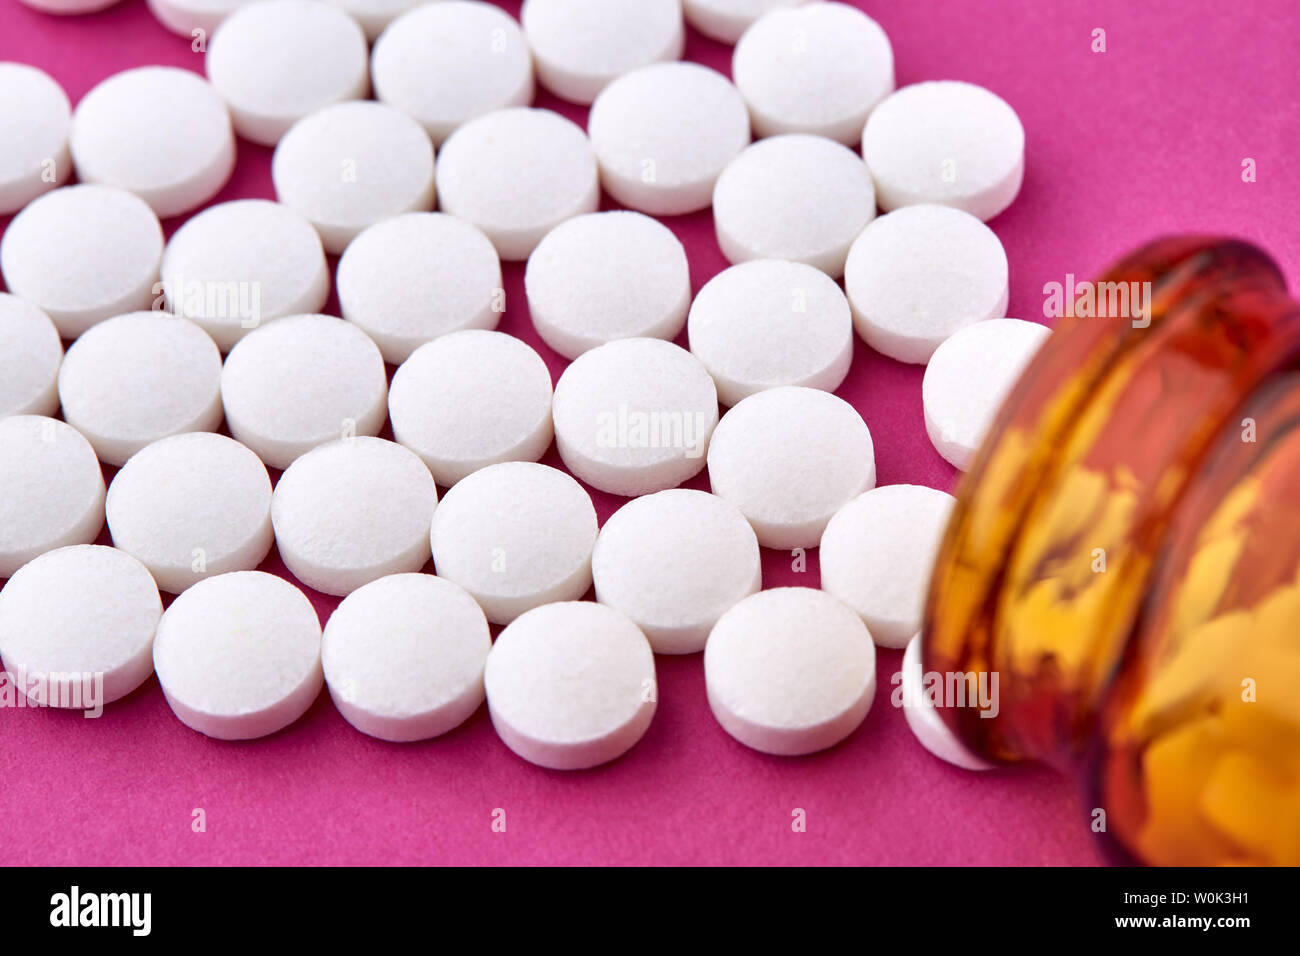 Many white pills and brown vial on pink background. Stock Photo